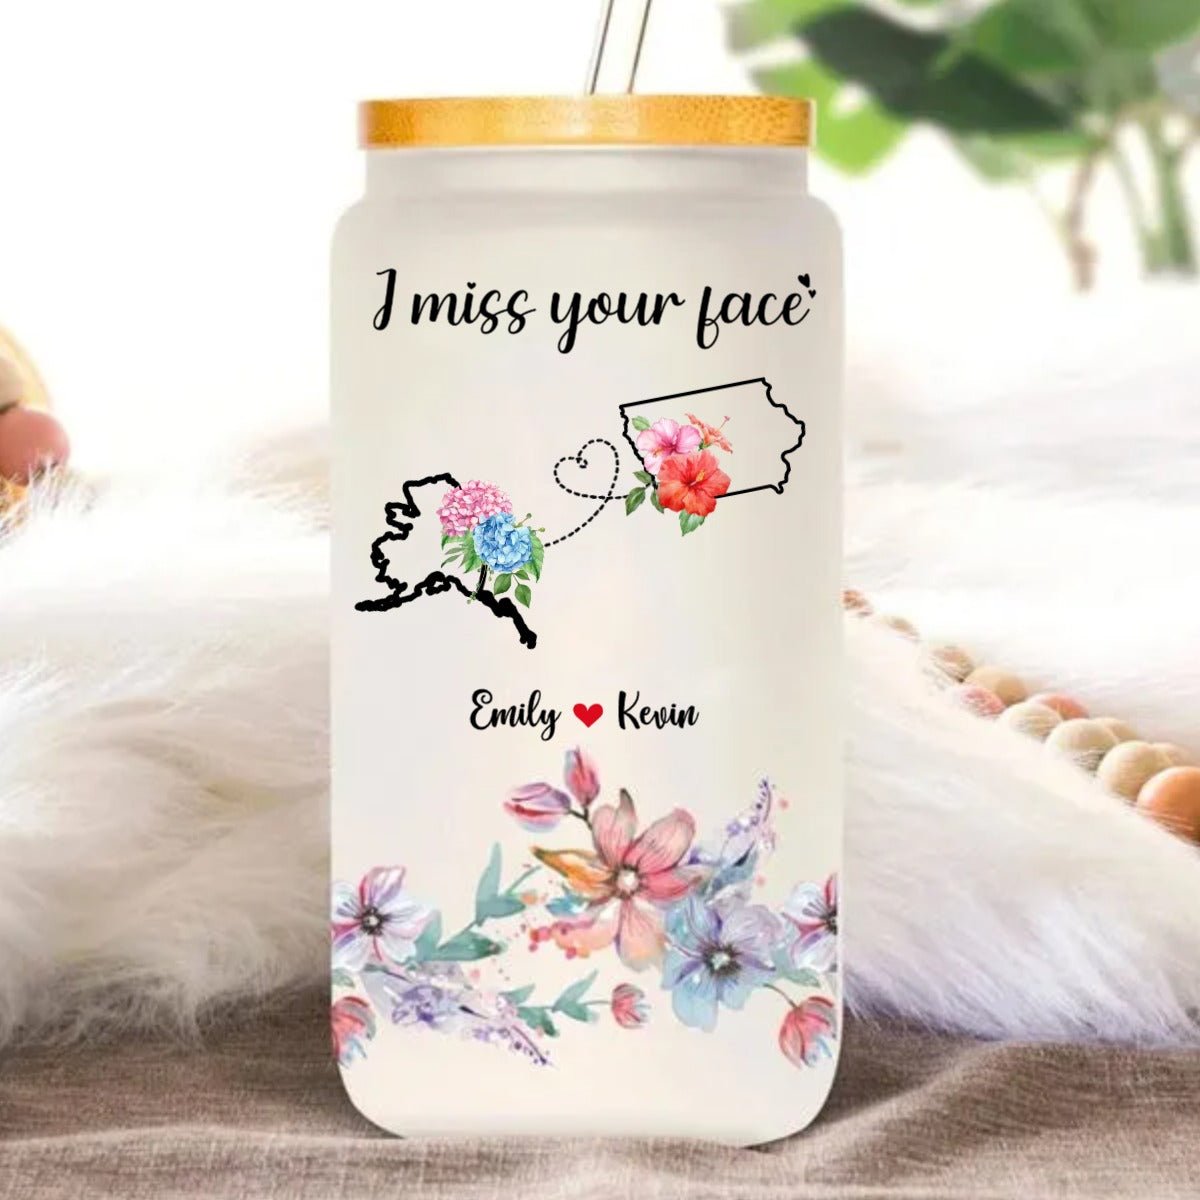 Besties - Long Distance Friendship I Miss Your Face - Personalized Tumbler Glass - The Next Custom Gift